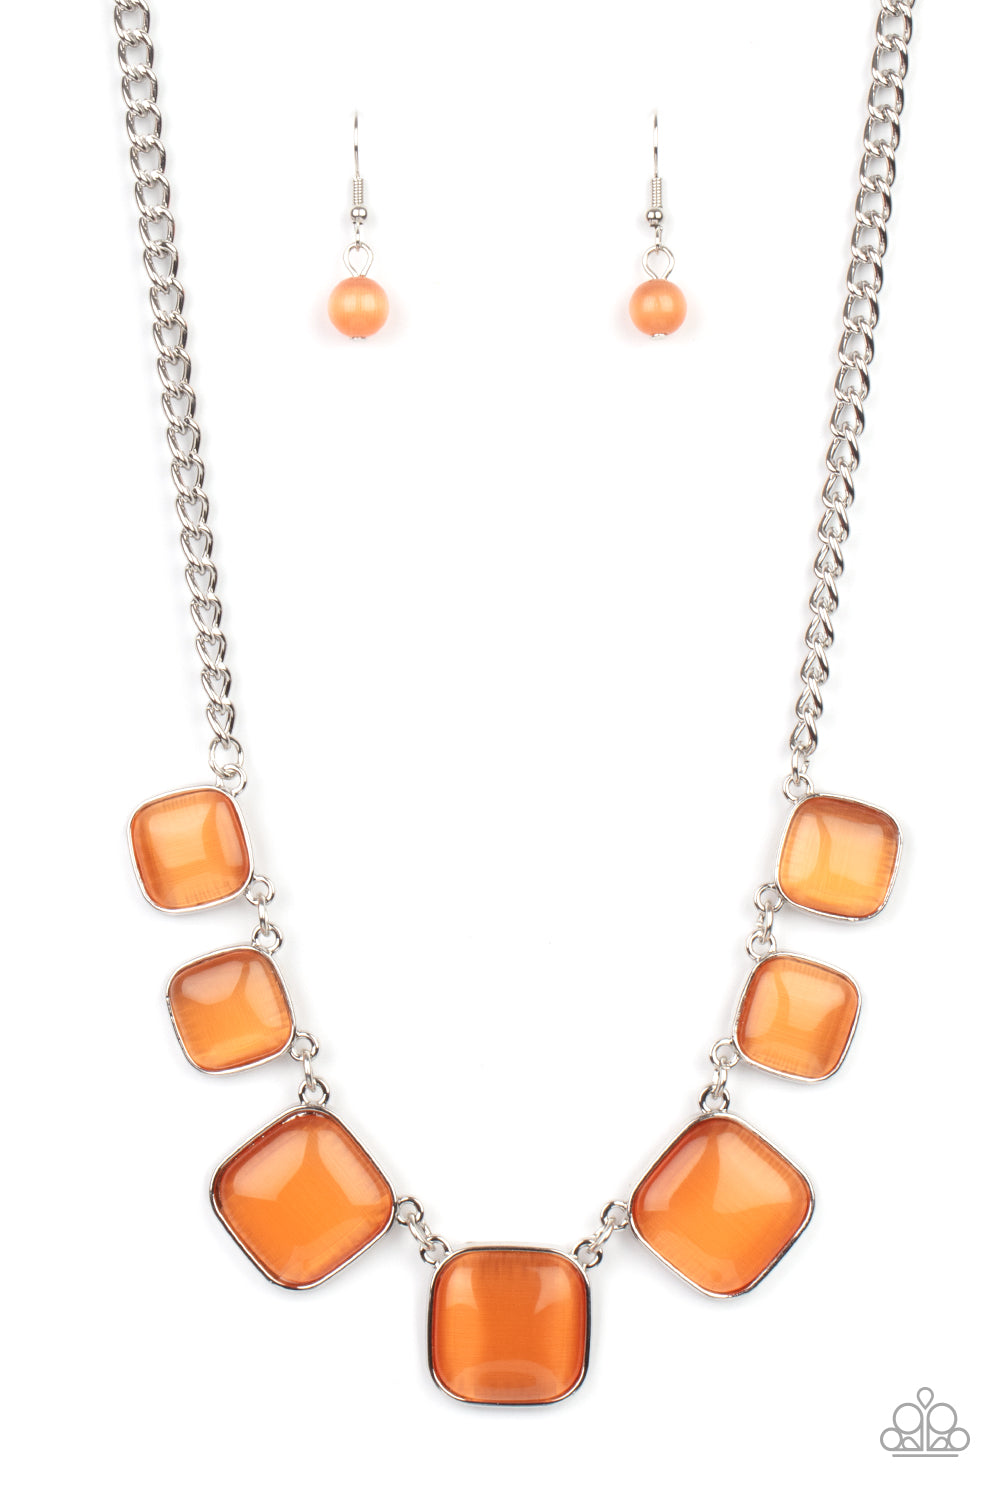 Encased in square silver fittings, a dewy collection of orange cat's eye stones gradually increase in size as they link below the collar for a whimsical pop of color. Features an adjustable clasp closure.